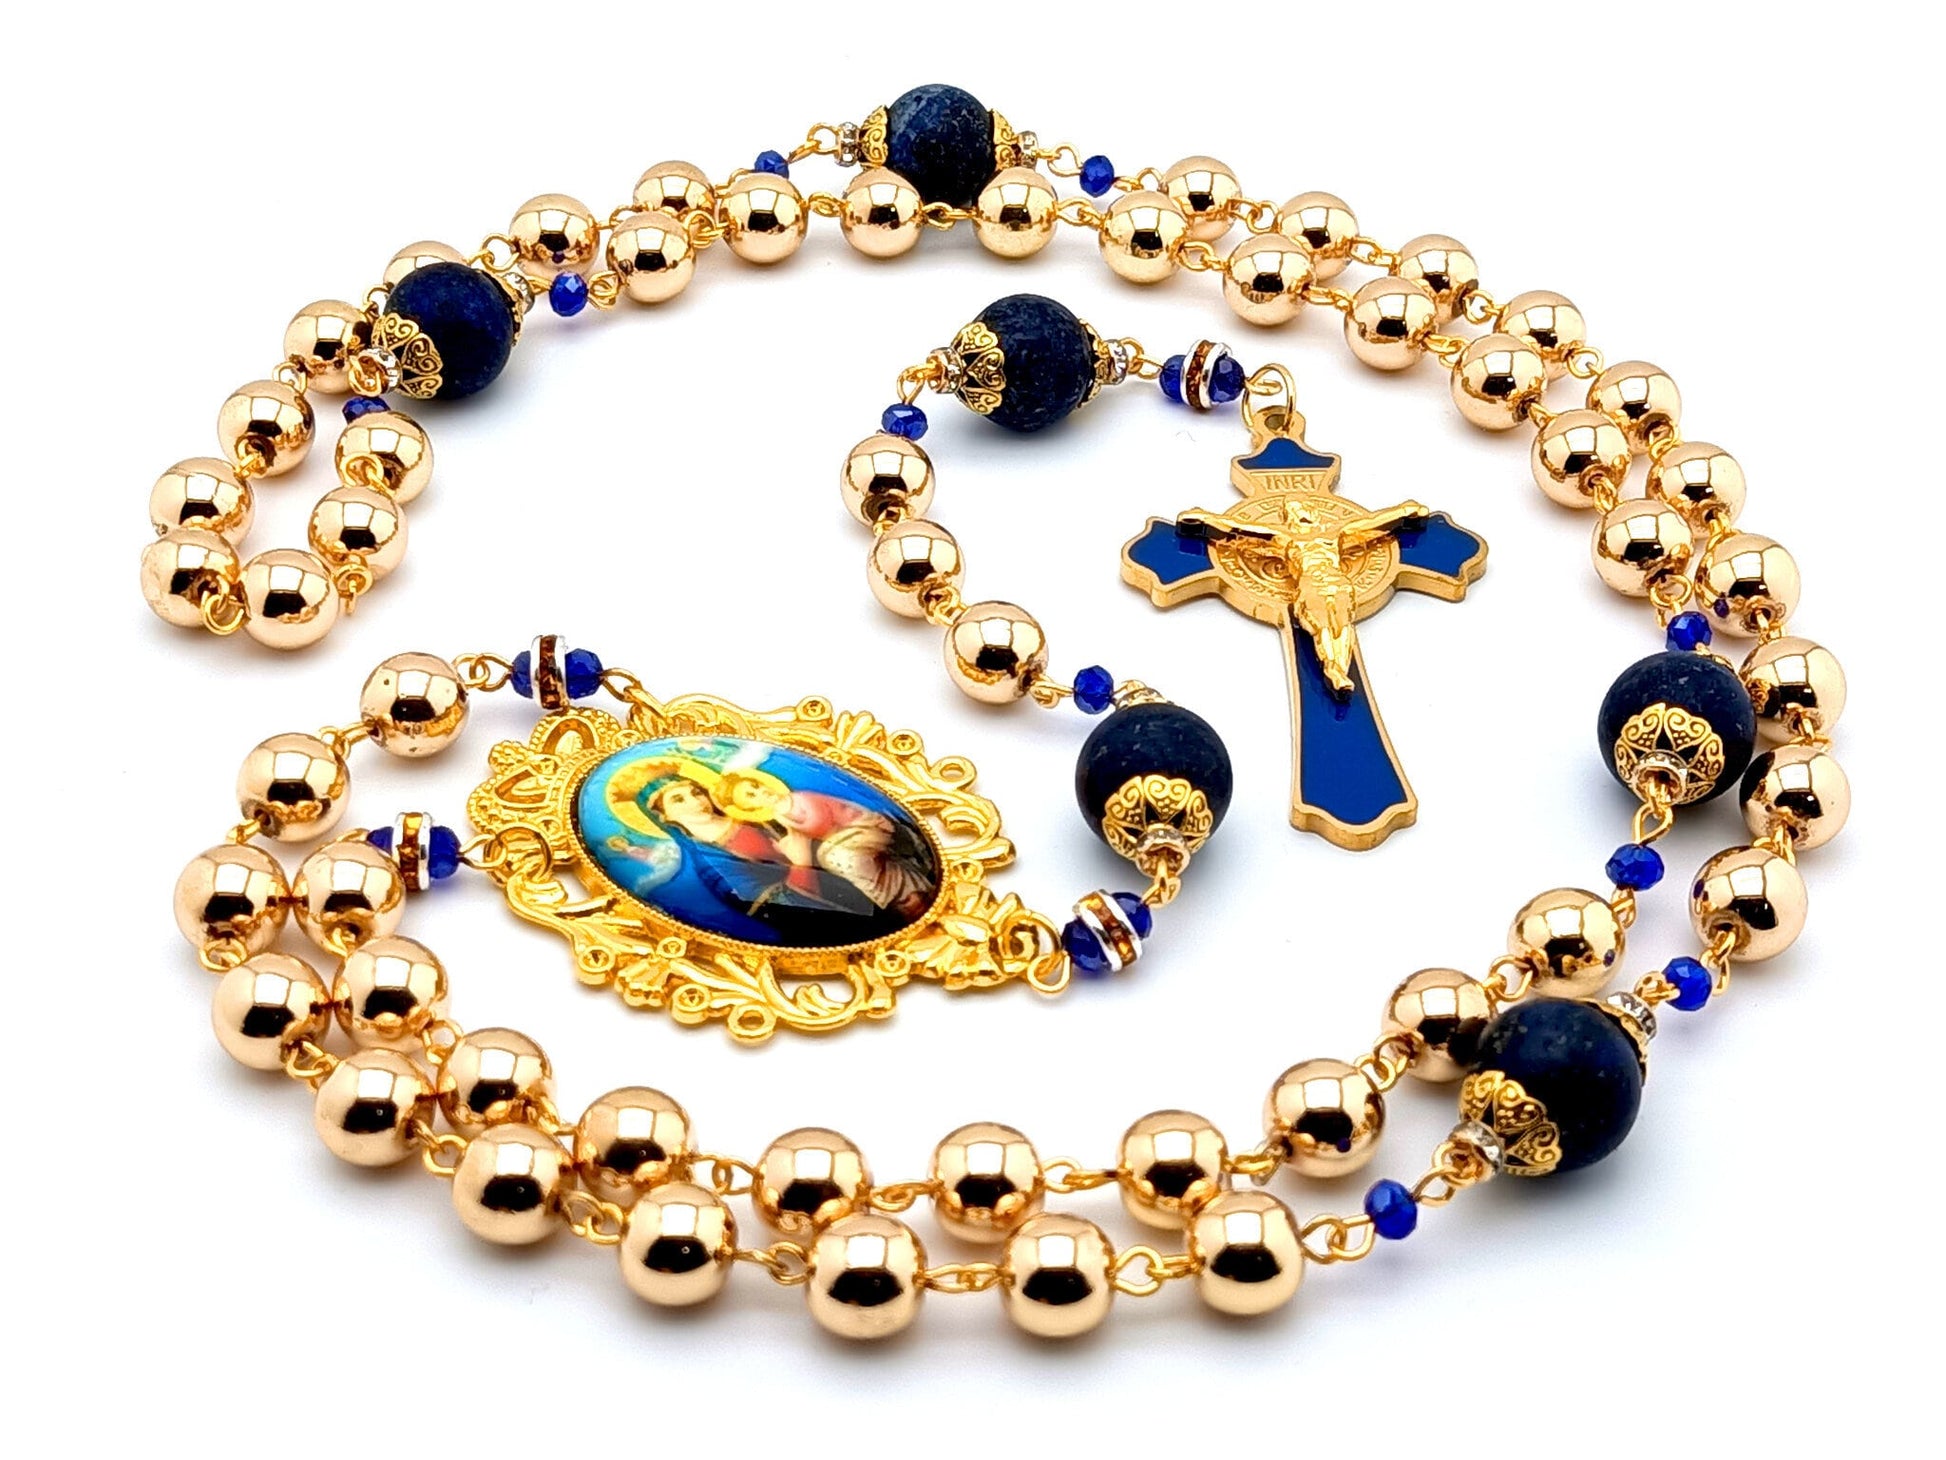 Our Lady of Perpetual Help unique rosary beads with lapis lazuli and hematite gemstone beads and blue enamel Saint Benedict stainless steel crucifix.